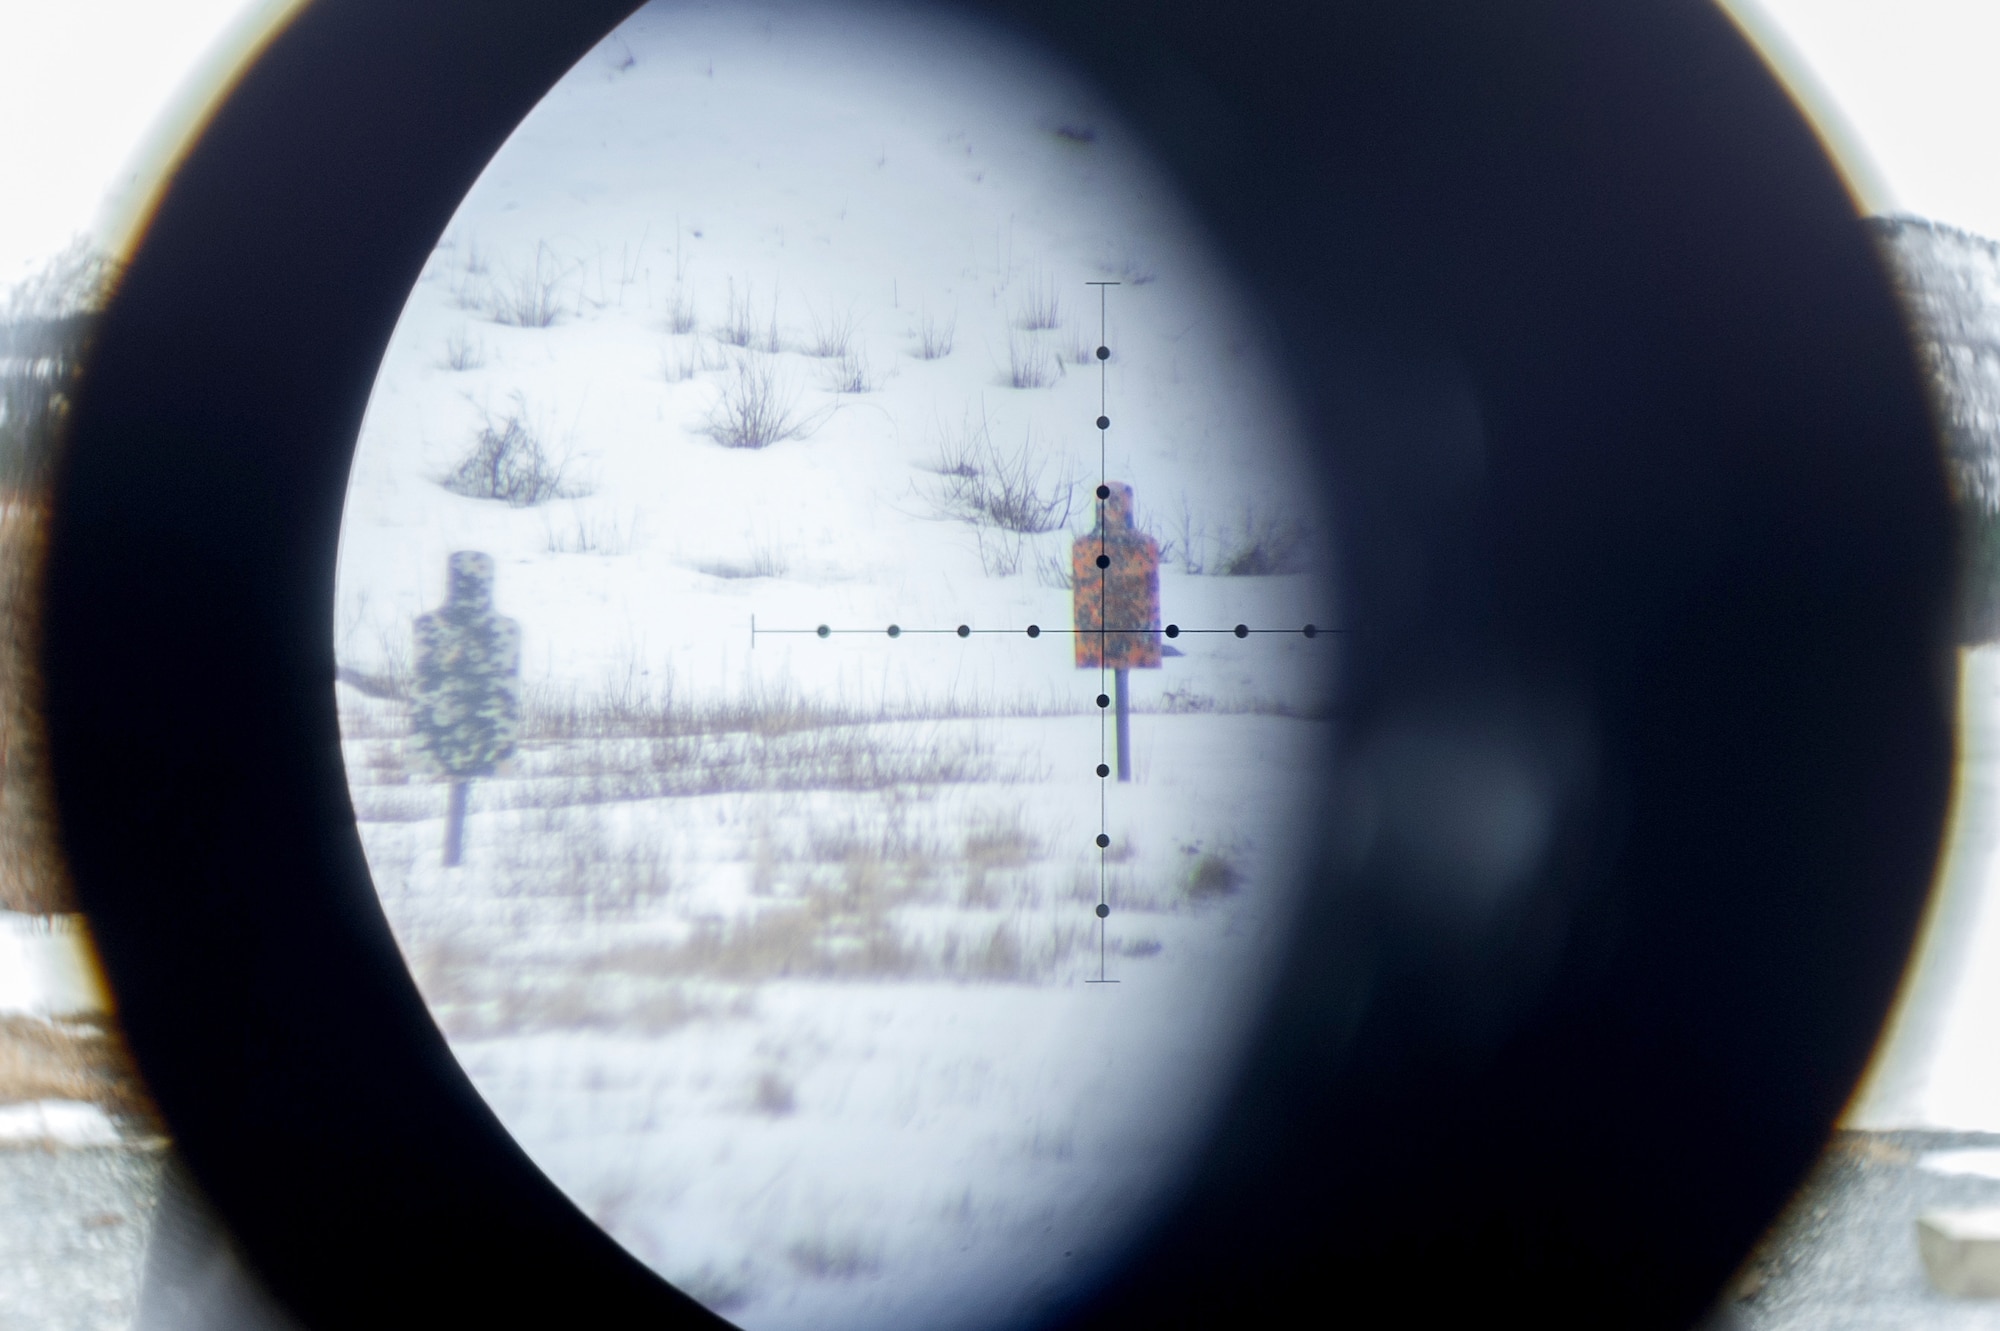 Long-distance targets are seen through a spotting scope as paratroopers assigned to the 1st Squadron, 40th Cavalry Regiment (Airborne), 4th Infantry Brigade Combat Team (Airborne), 25th Infantry Division, U.S. Army Alaska, hone marksmanship skills with M110 Semi-Automatic Sniper Systems and M2010 Enhanced Sniper Rifles on Statler range at Joint Base Elmendorf-Richardson, Alaska, April 6, 2018.  A sniper's main responsibility is to deliver discriminatory, highly accurate rifle fire against enemy targets that cannot be engaged successfully by the regular rifleman due to range, size, location, fleeting nature, or visibility.